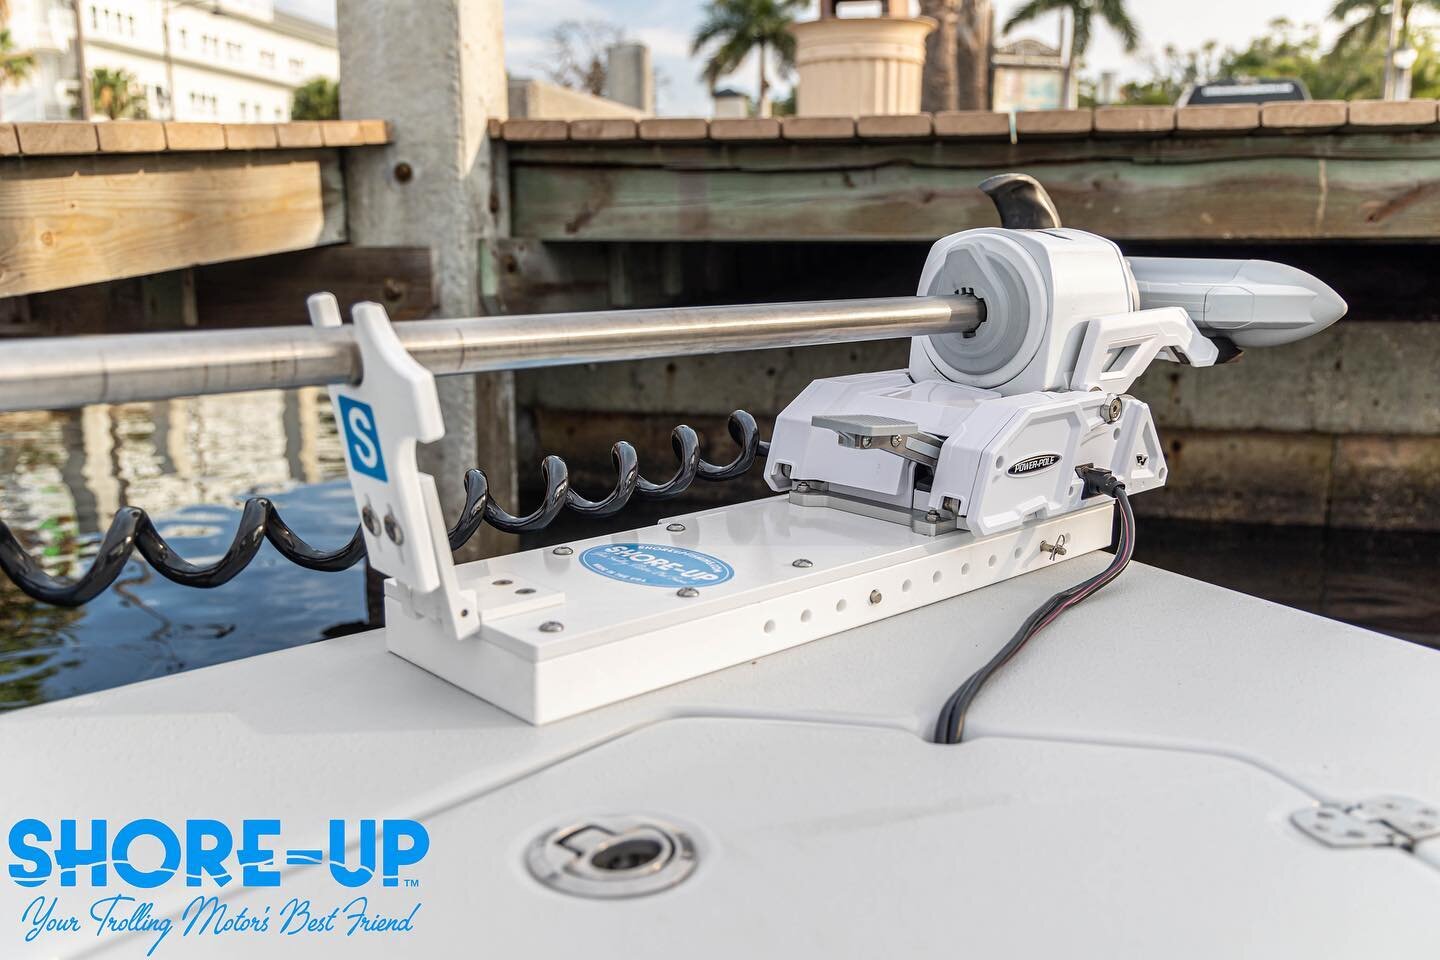 The Shore-Up mount helps you from the moment you launch your boat to the moment you trailer it!⠀
⠀
⠀
⠀
⠀
#shoreup #fishing #trollingmotor #shoreupsystems